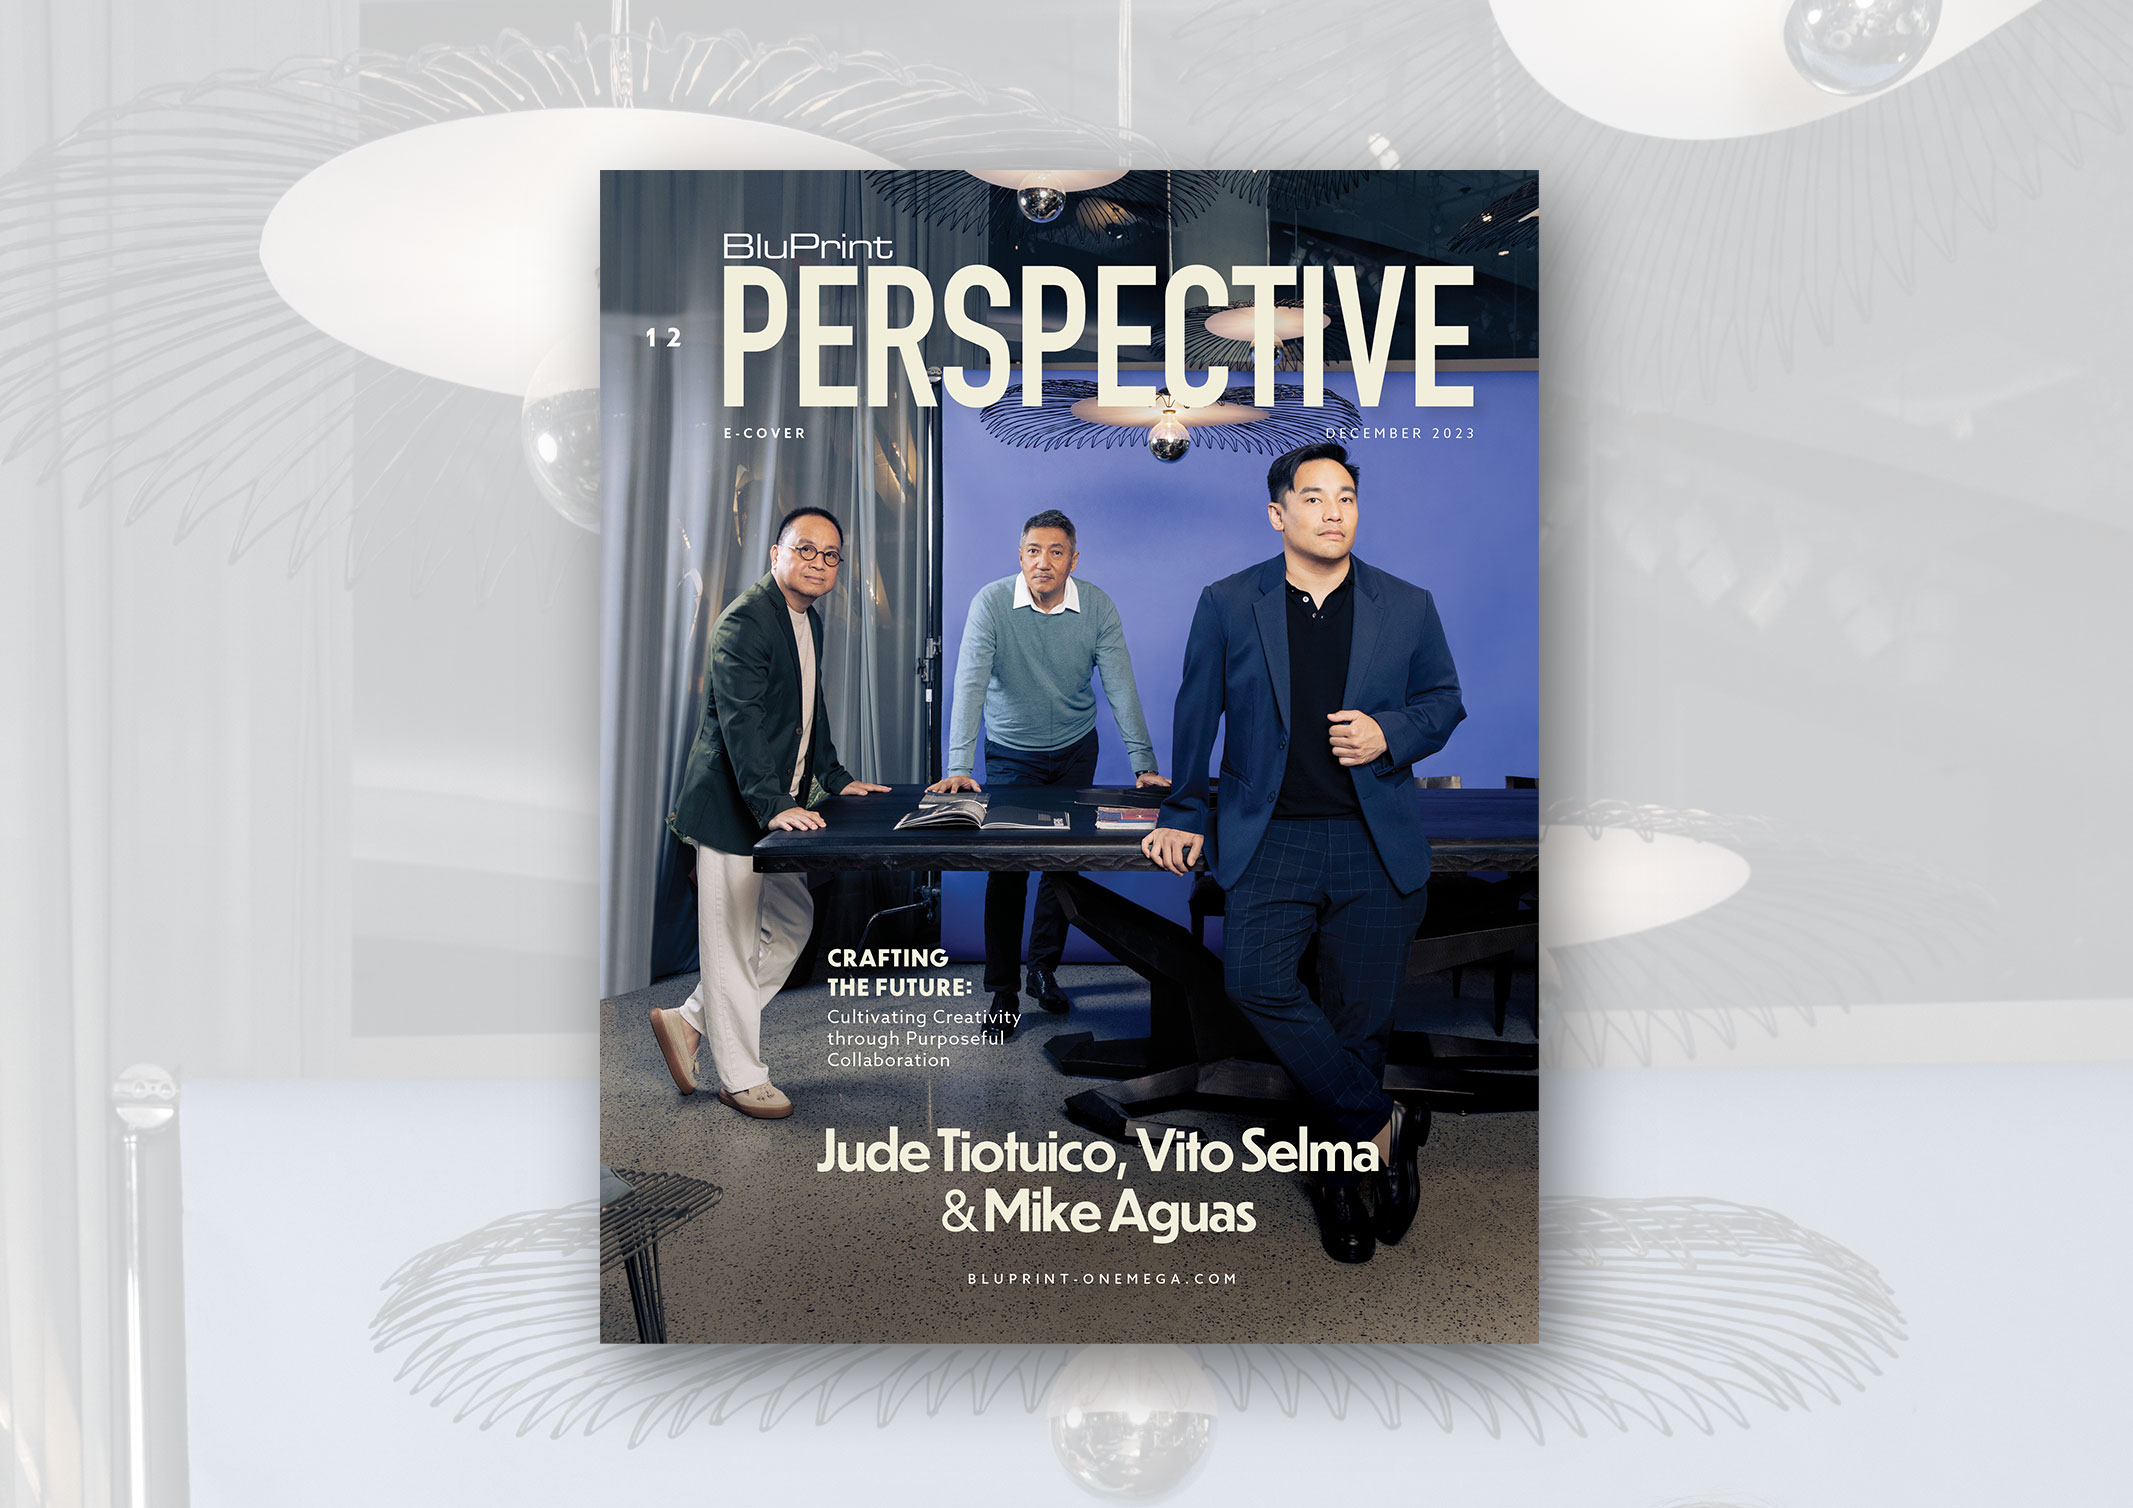 Bluprint Perspective December Cover featuring Jude Tiotuico, Vito Selma, and Miguel Aguas